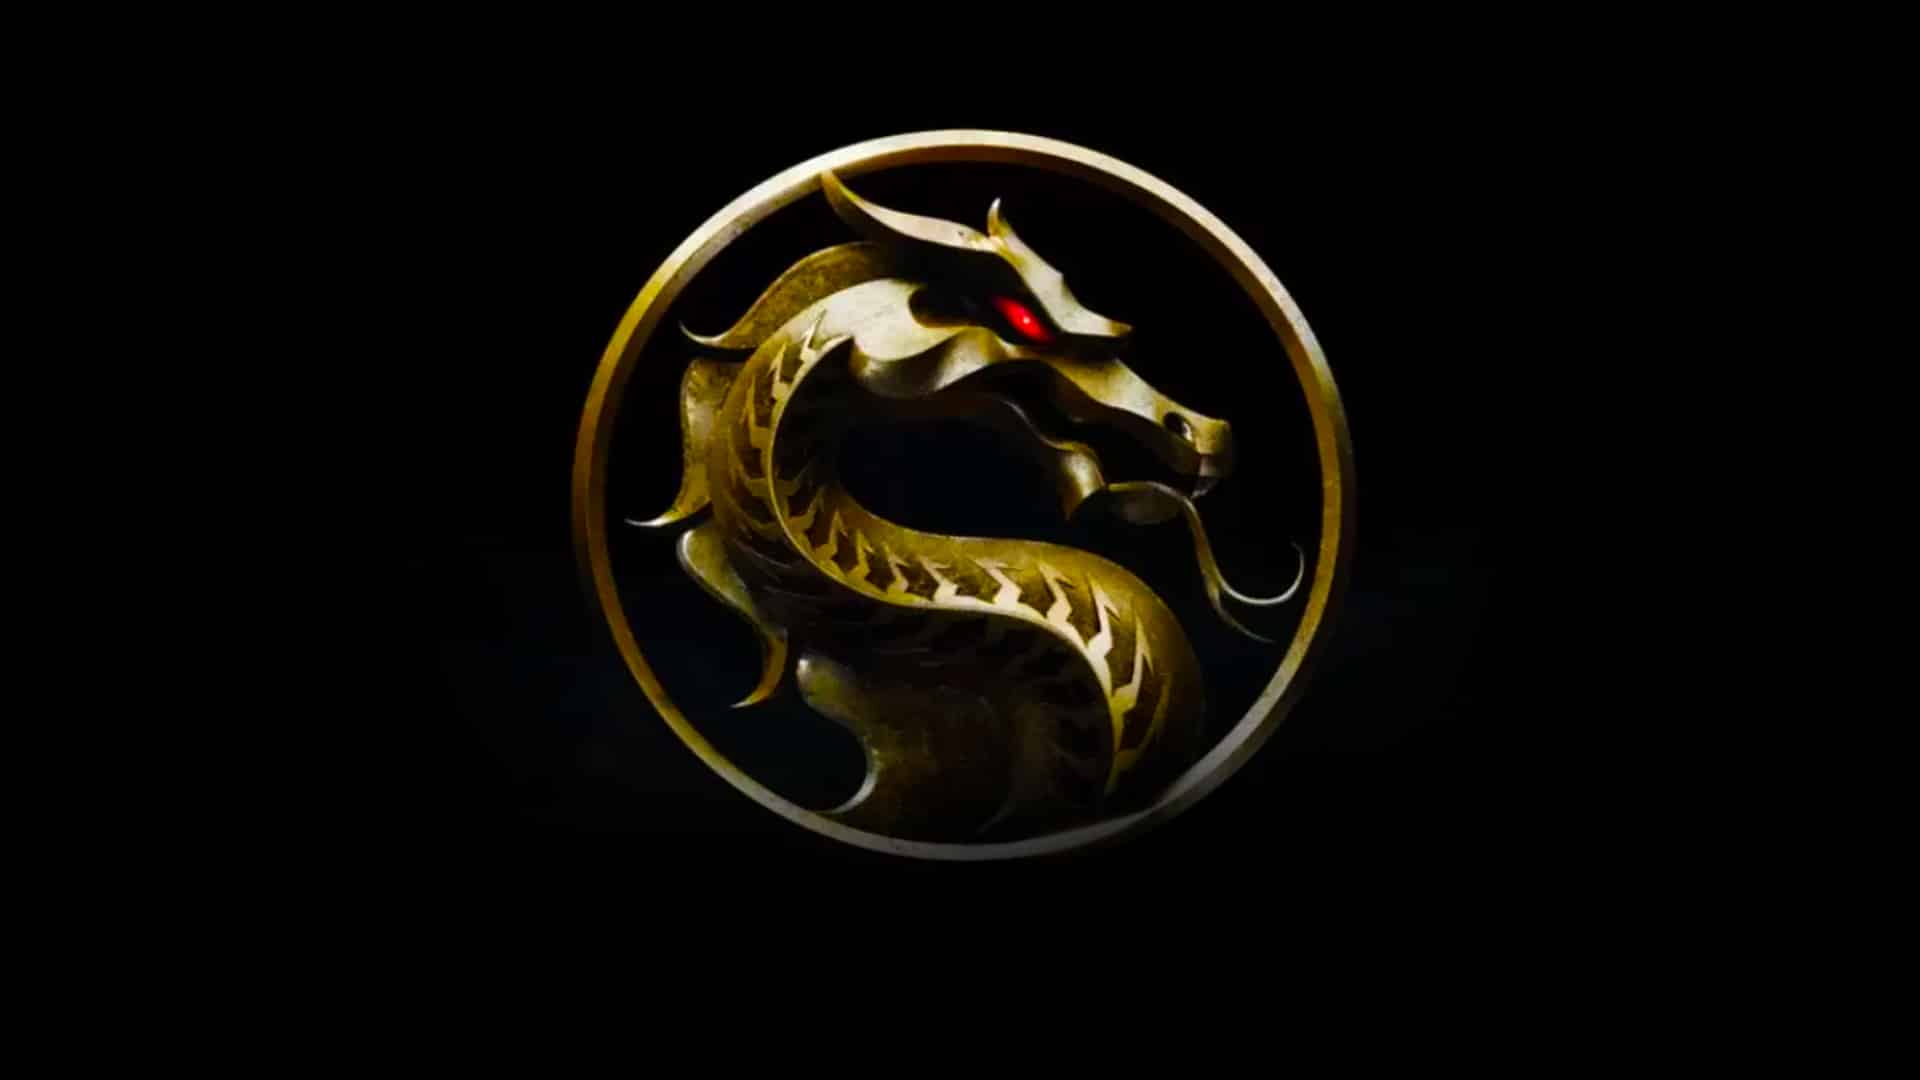 Mortal Kombat 2021 Movie: The First Look Image Are Here